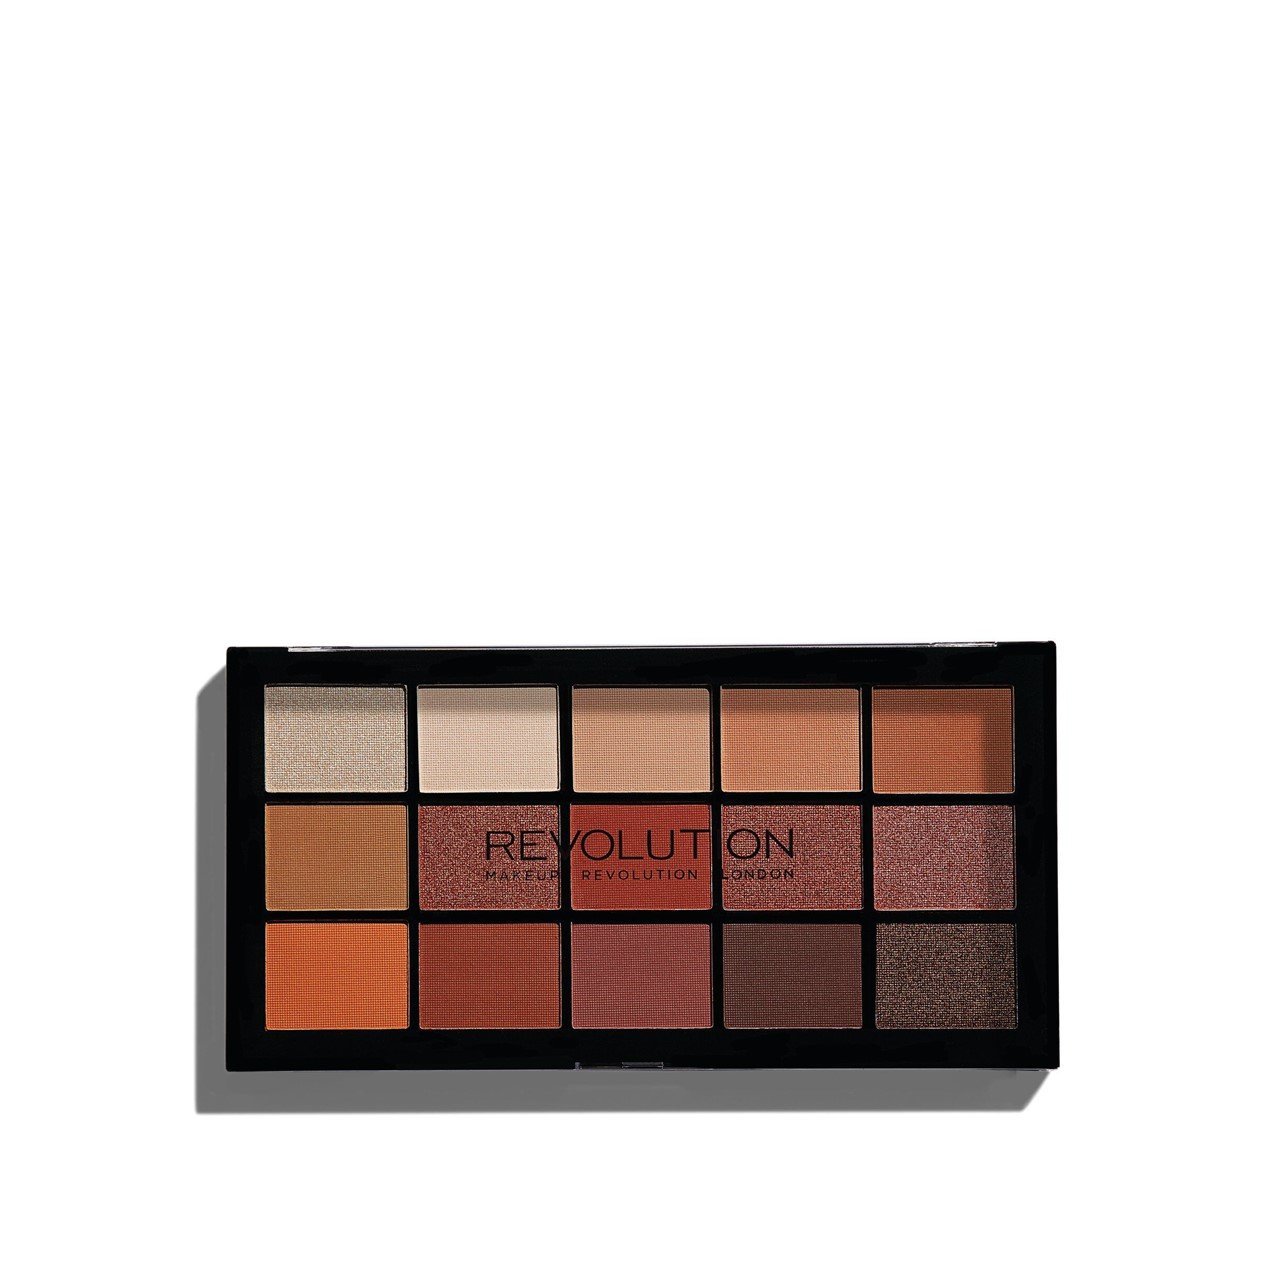 https://static.beautytocare.com/cdn-cgi/image/width=1600,height=1600,f=auto/media/catalog/product//m/a/makeup-revolution-reloaded-eyeshadow-palette-iconic-fever-1-1g-x15.jpg